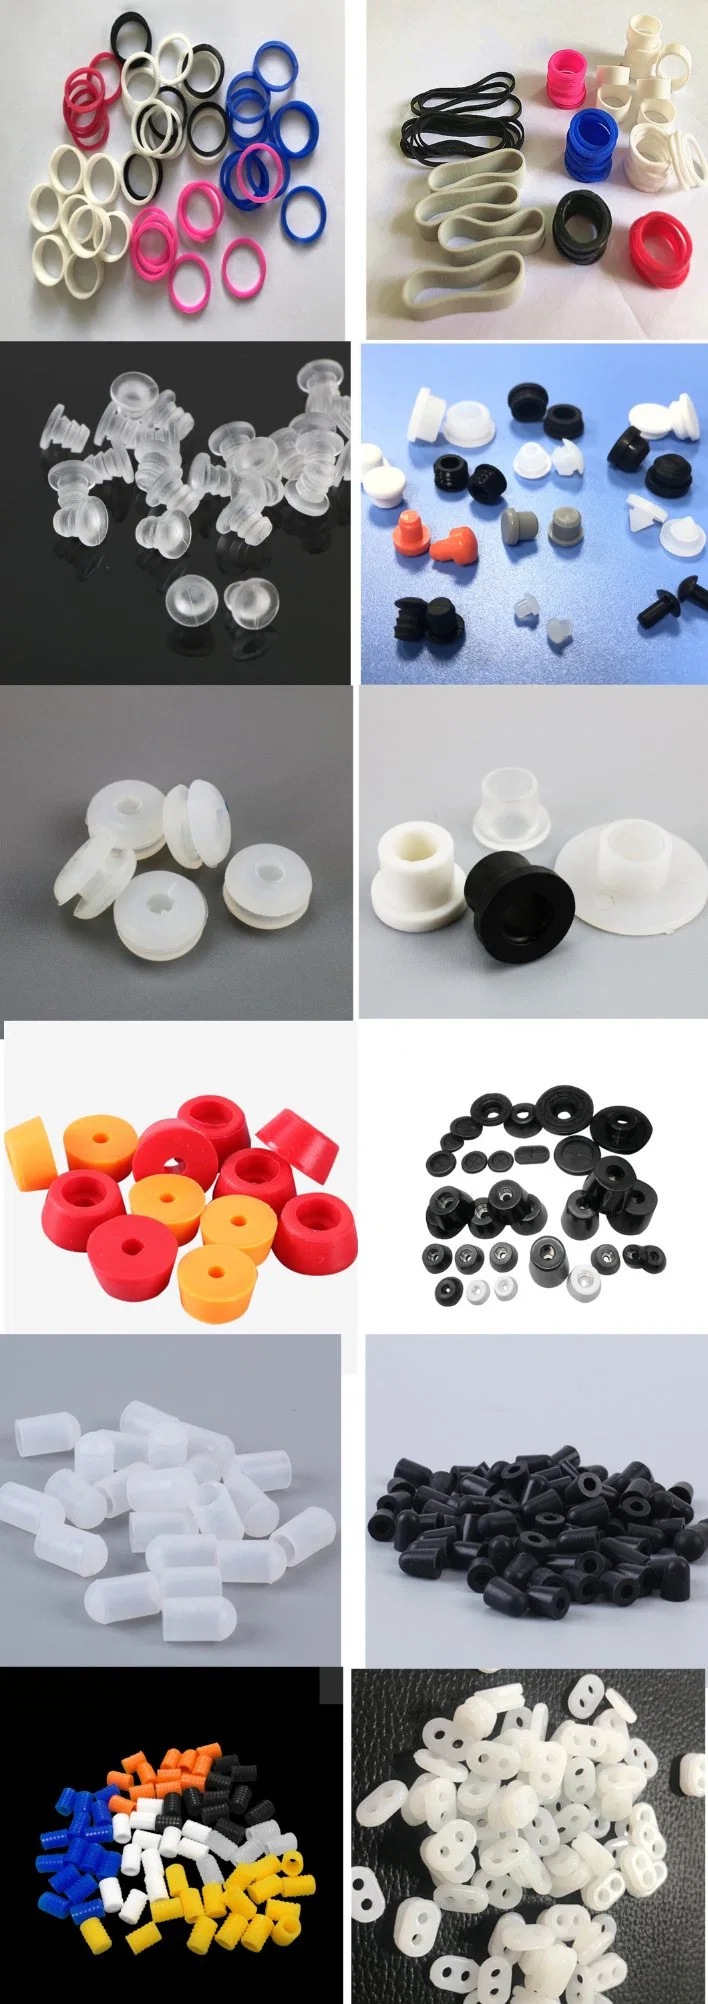 OEM Silicone Rubber Molding/Plastic Injection Parts